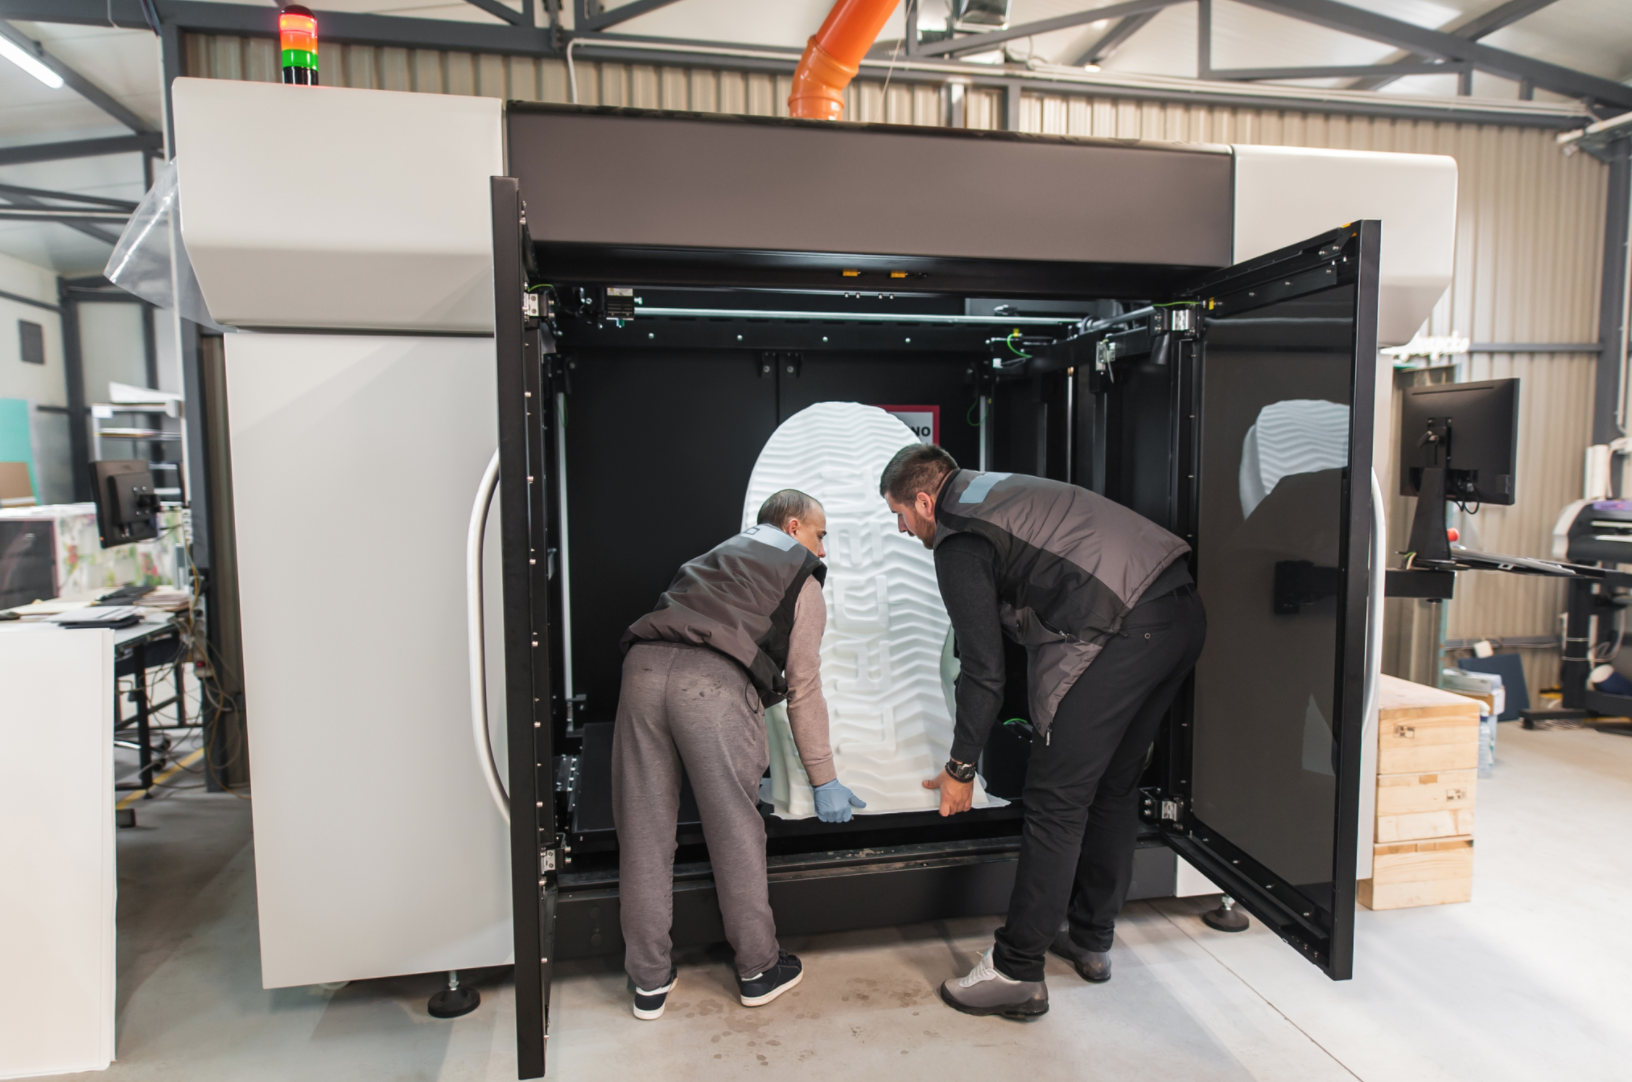 Large-format 3D printers, though flexible, are not always the best choice for smaller parts.